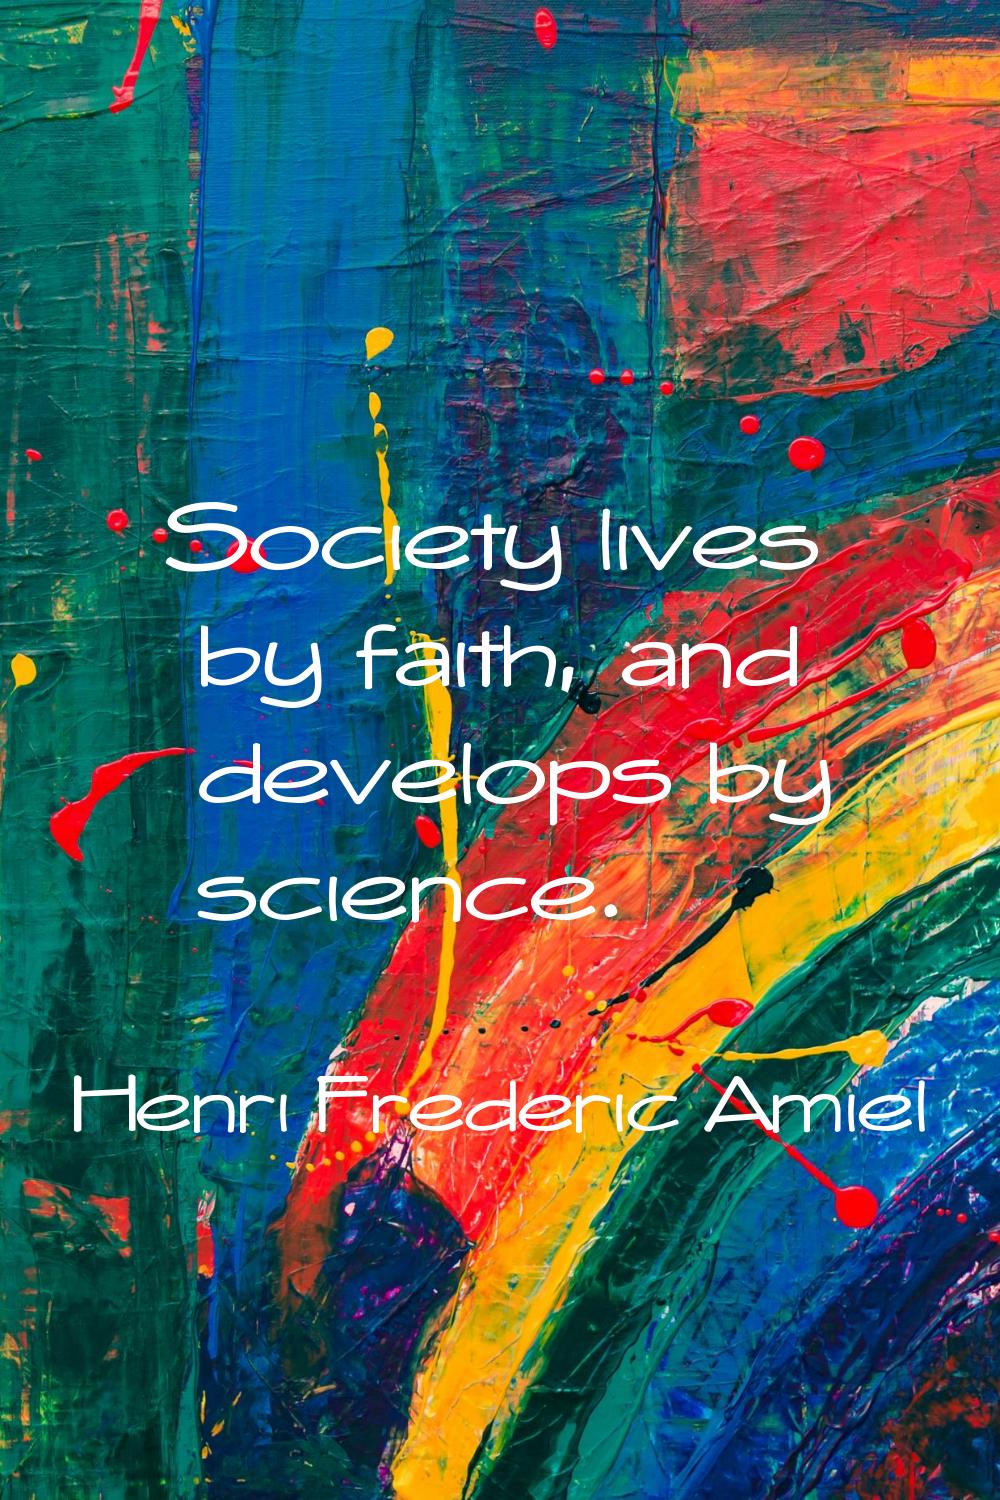 Society lives by faith, and develops by science.